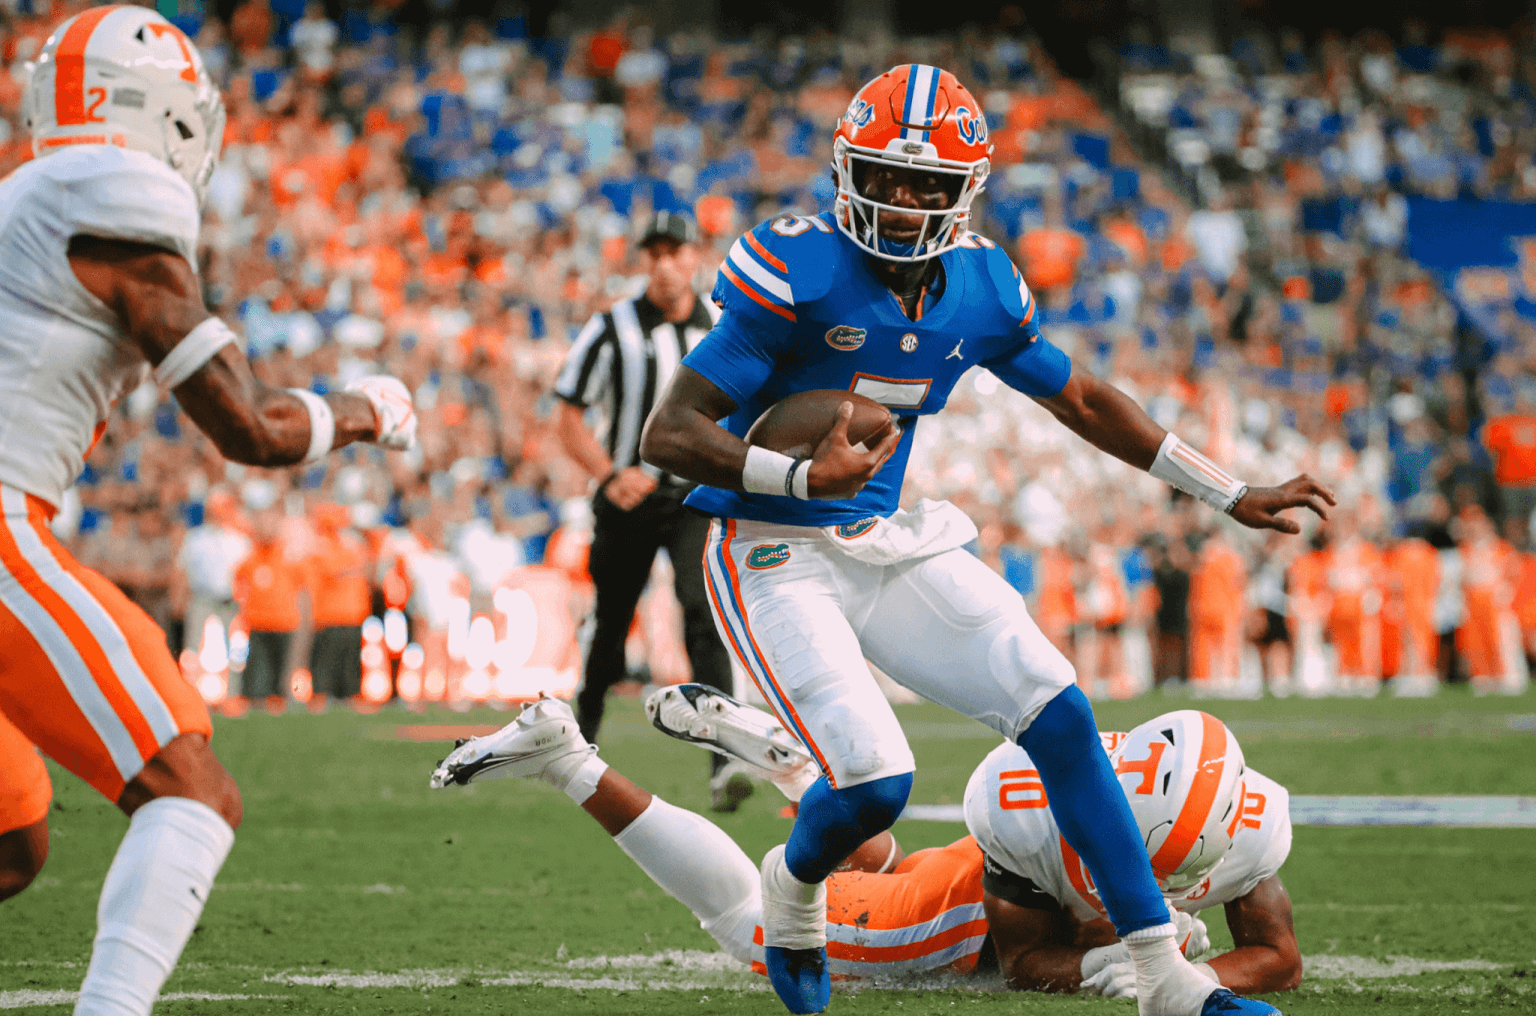 Five Takeaways from the Florida Gators' 3814 win over Tennessee  In